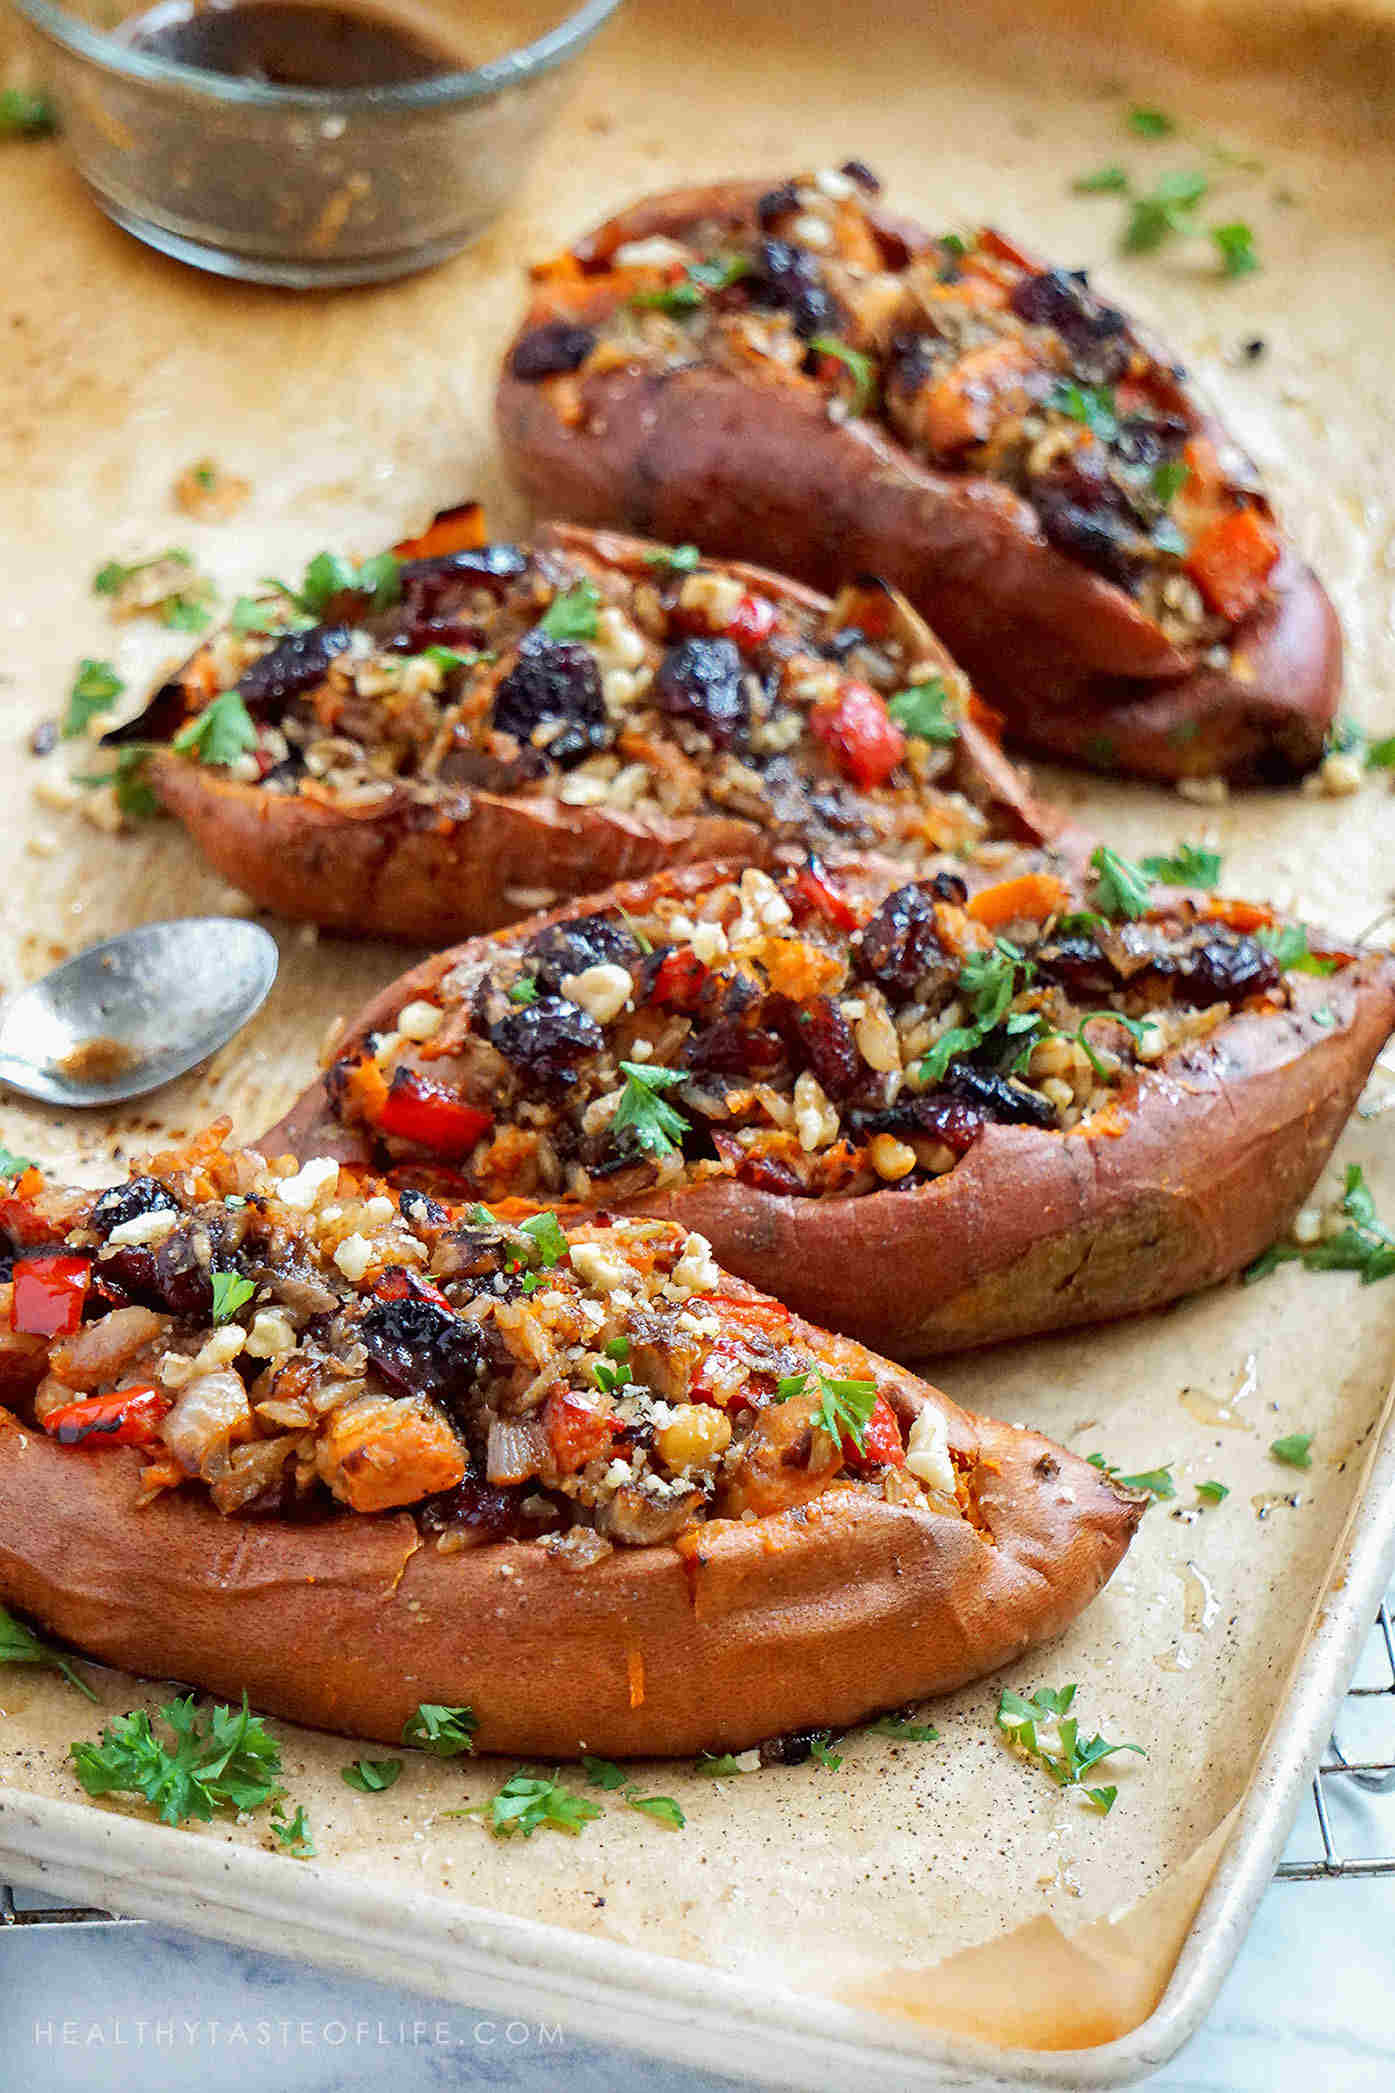 Loaded Sweet Potatoes Recipe - Savory Baked sweet potatoes loaded with rice, vegetables and dried fruits - baked in the oven and finished with a maple balsamic glaze